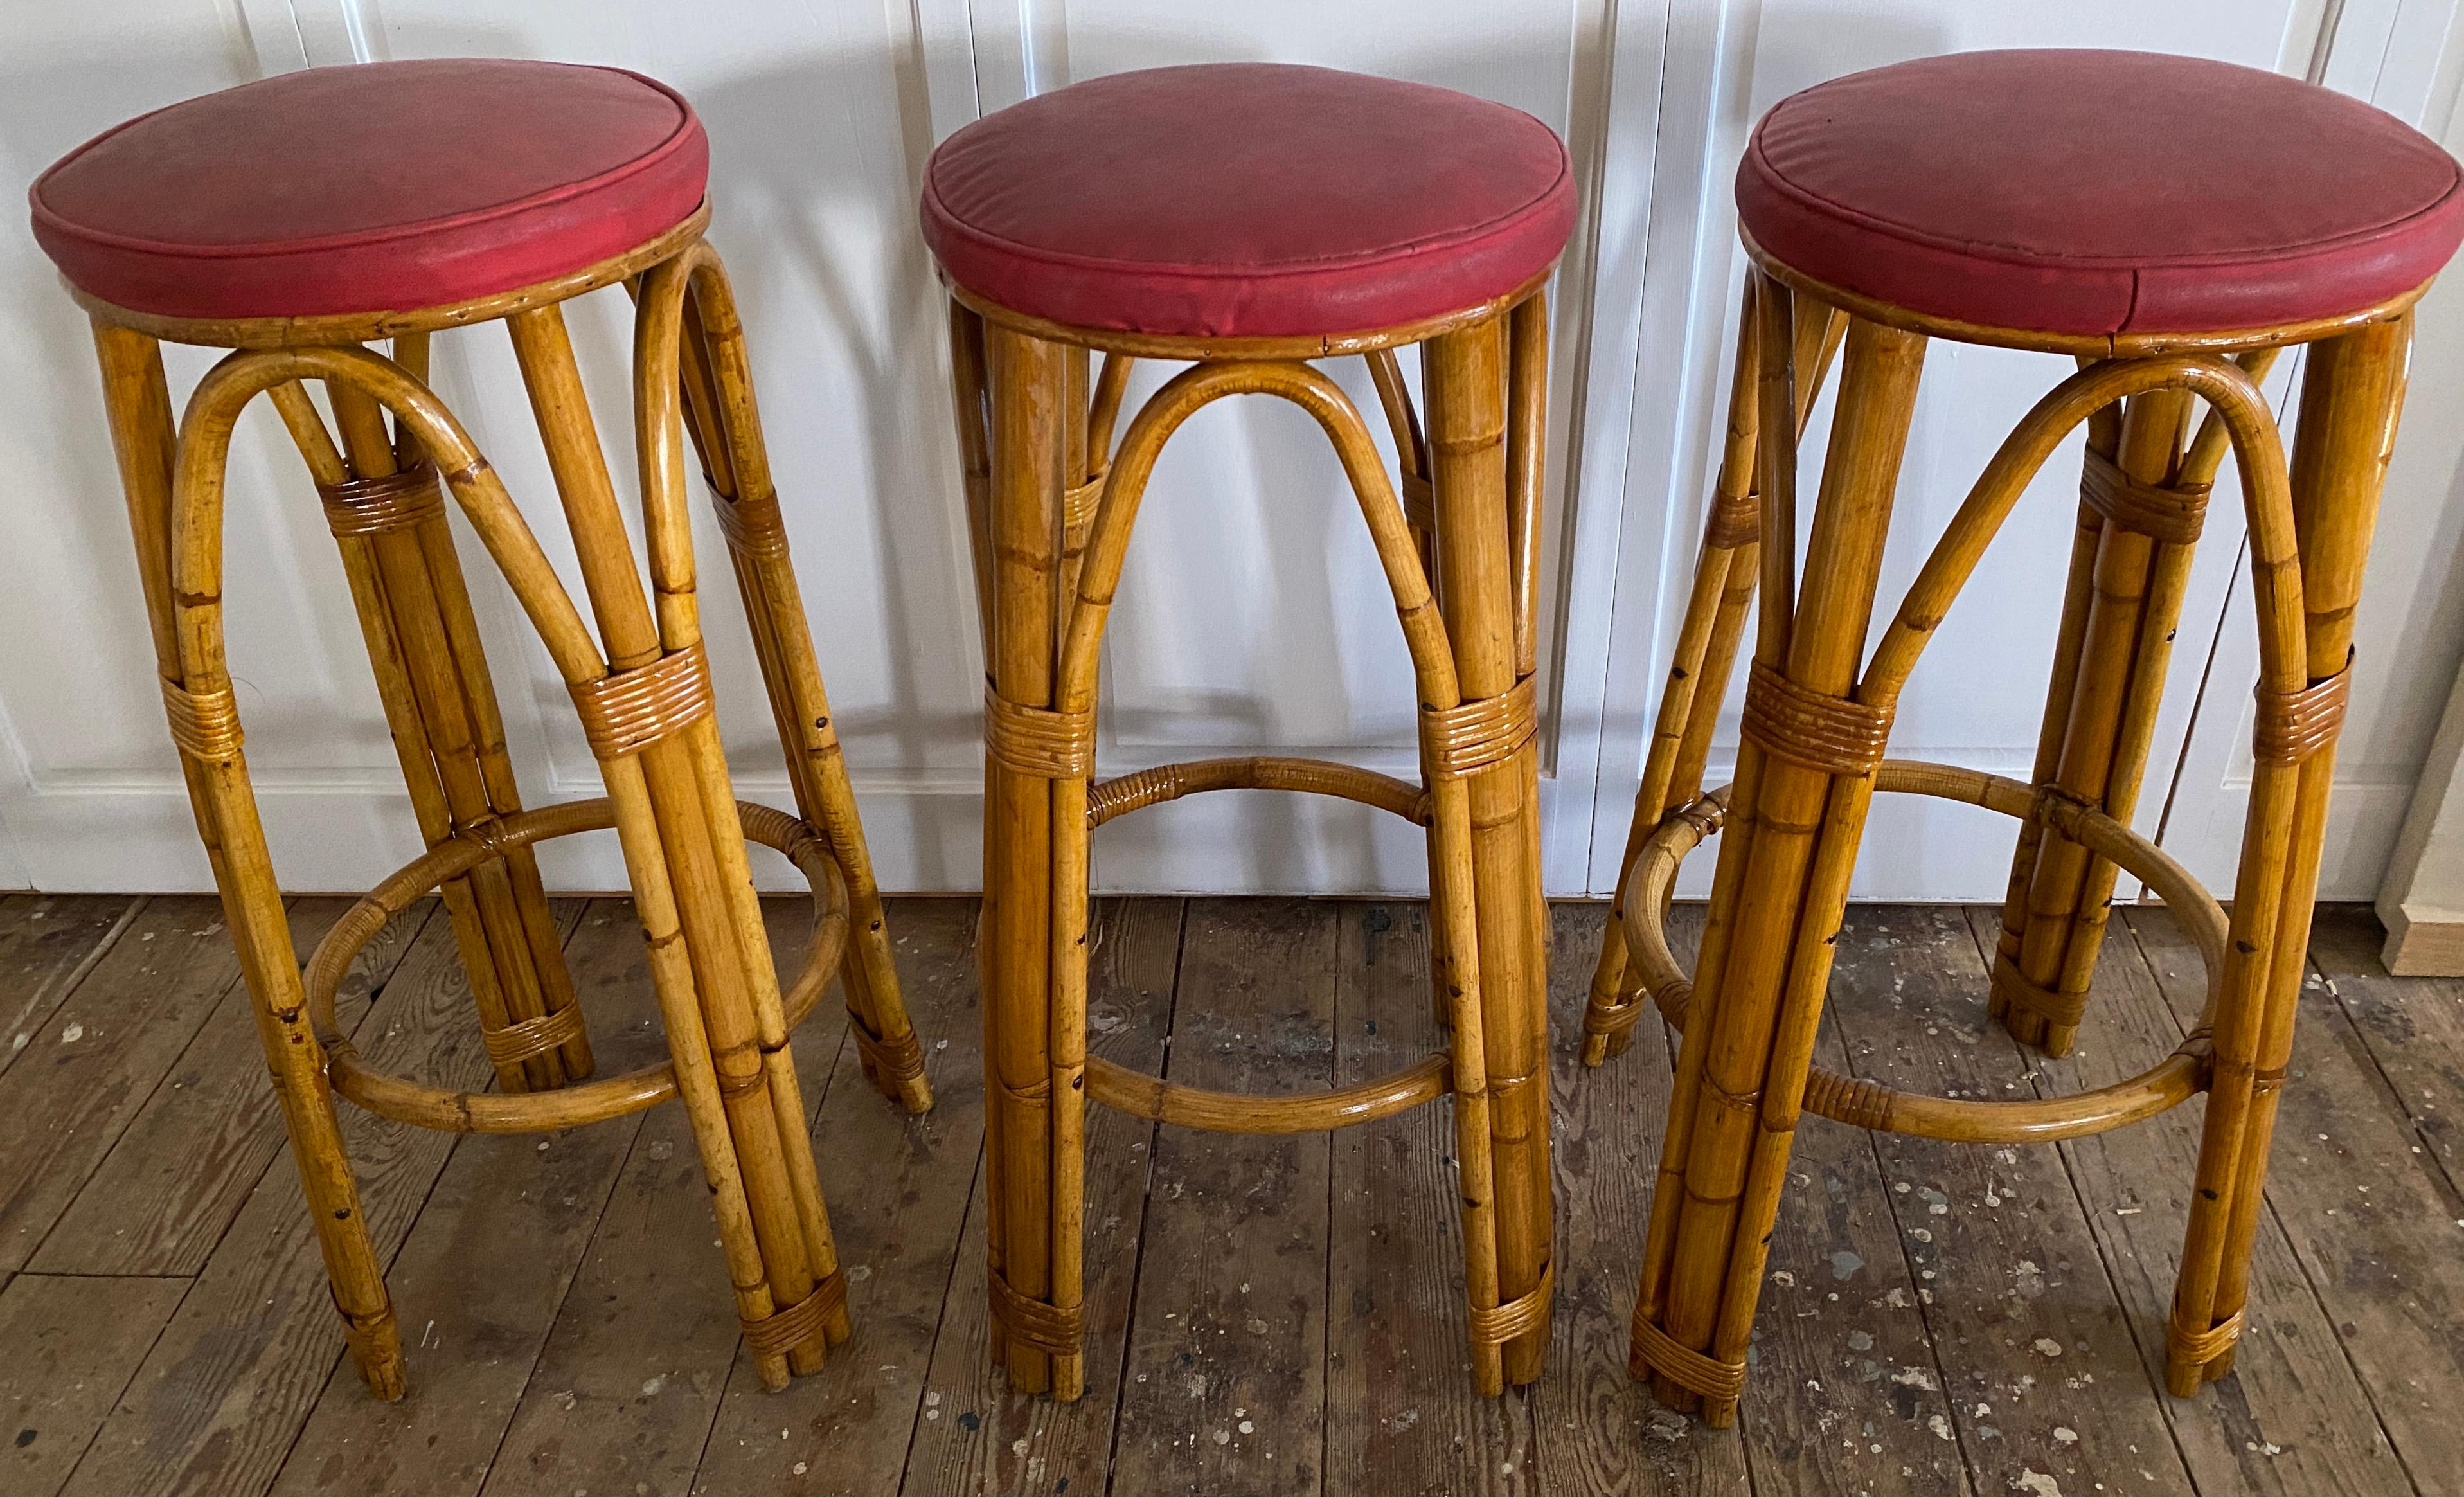 Set of 3 stylish deco style bamboo and caned vintage bar stools with vinyl padded seat cushions. Made in France in 1950s. The stools would be equally at home in a cafe bar, kitchen counter or breakfast bar.